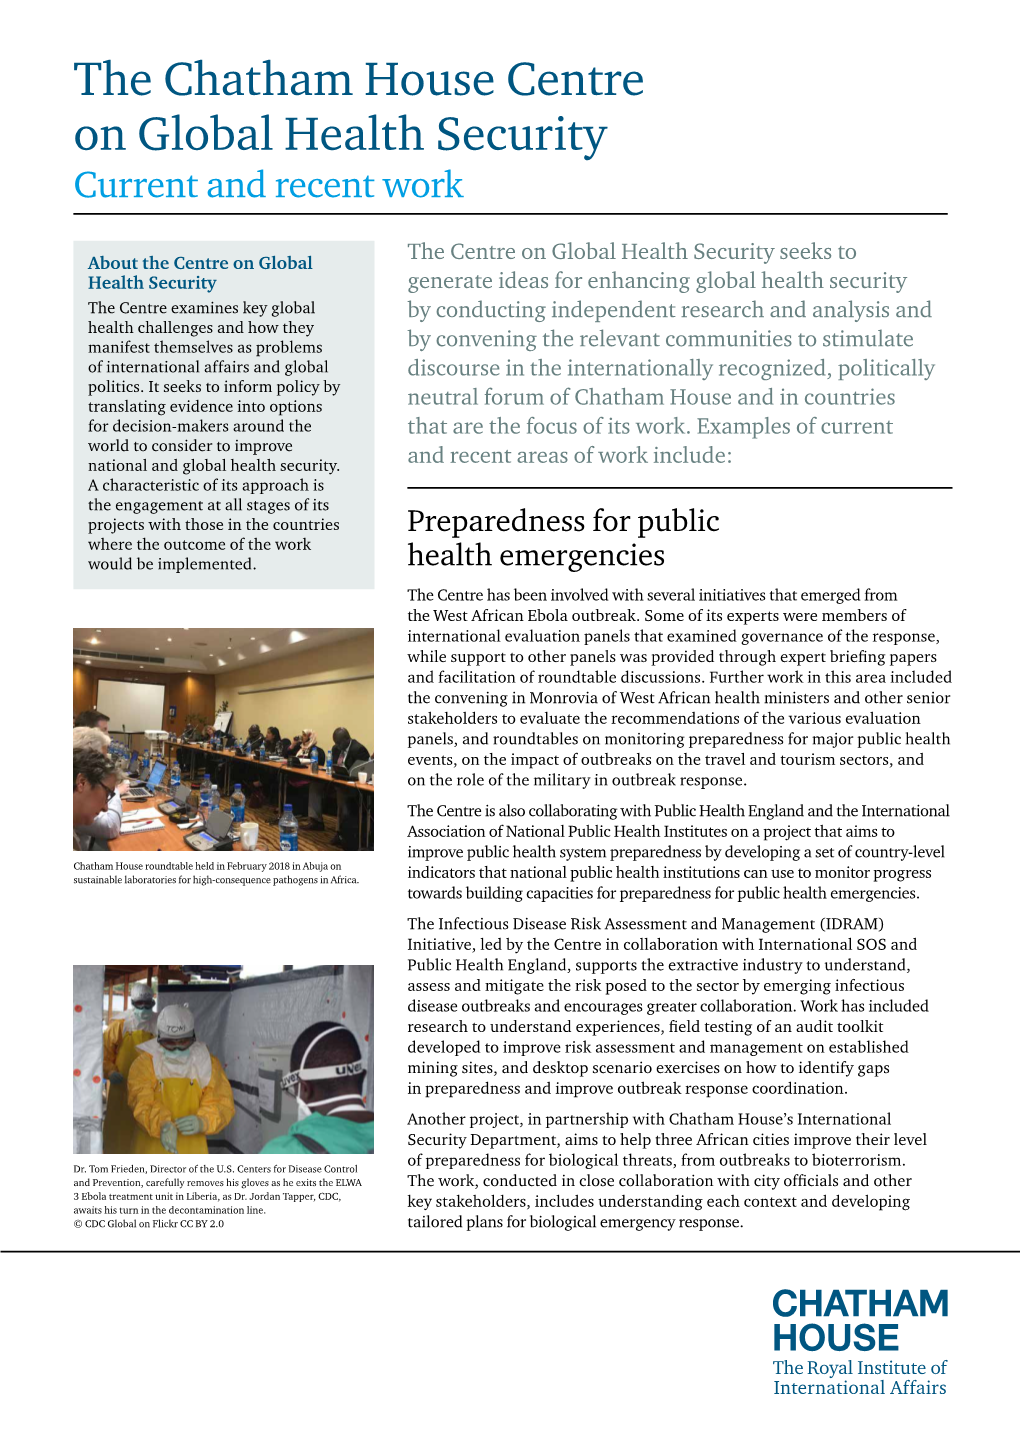 The Chatham House Centre on Global Health Security Current and Recent Work